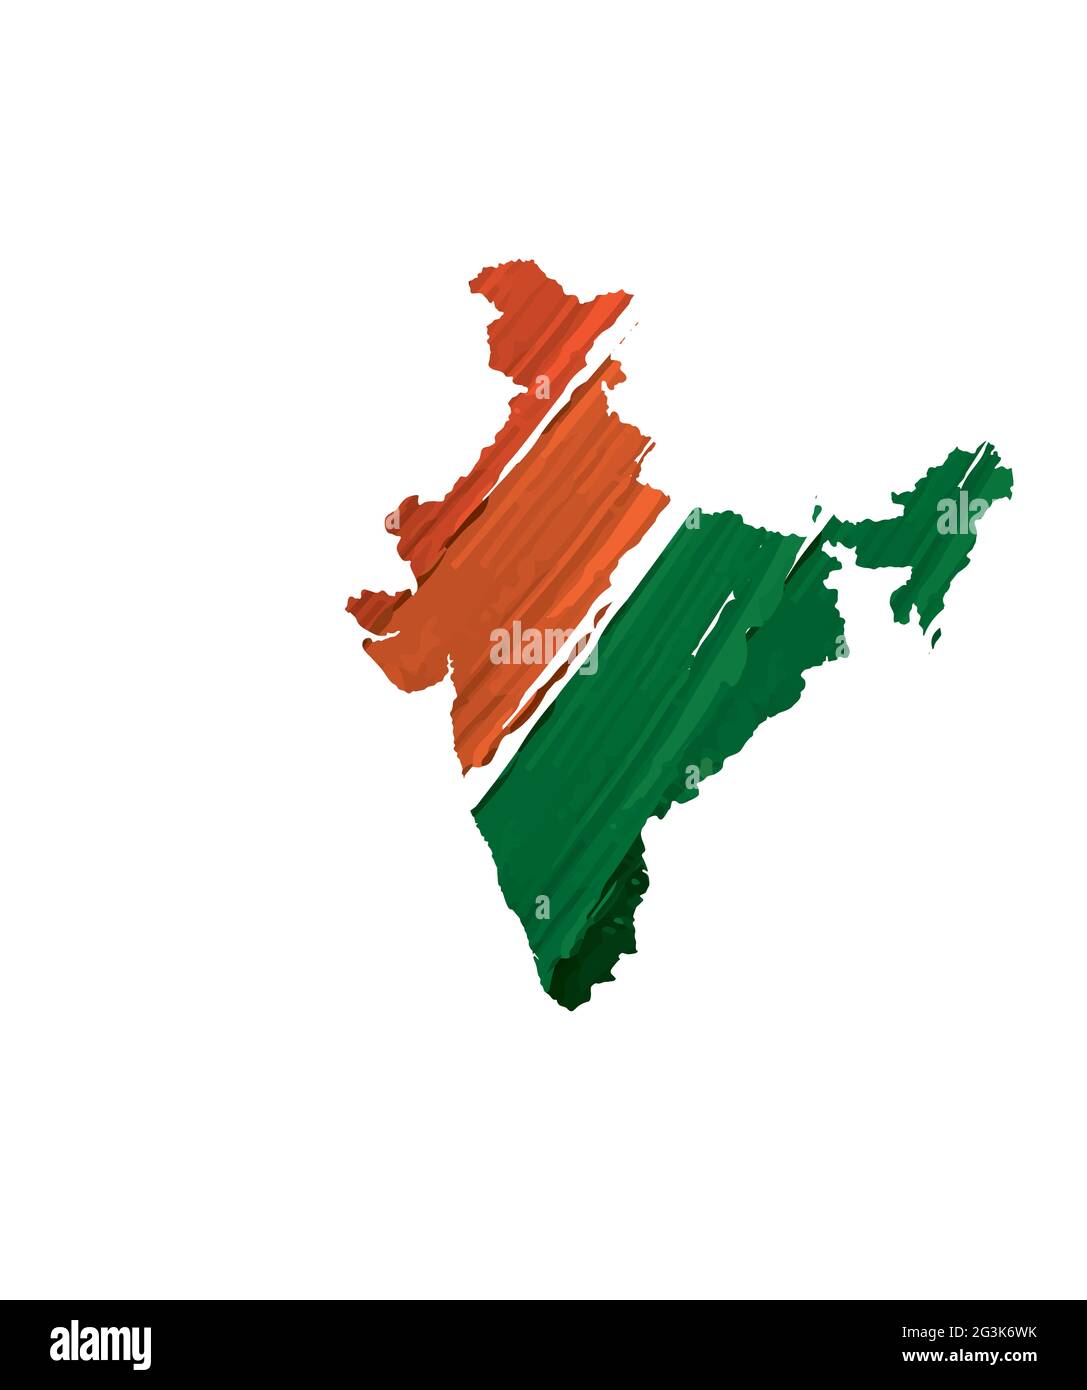 India flag with acylic color Design Stock Photo